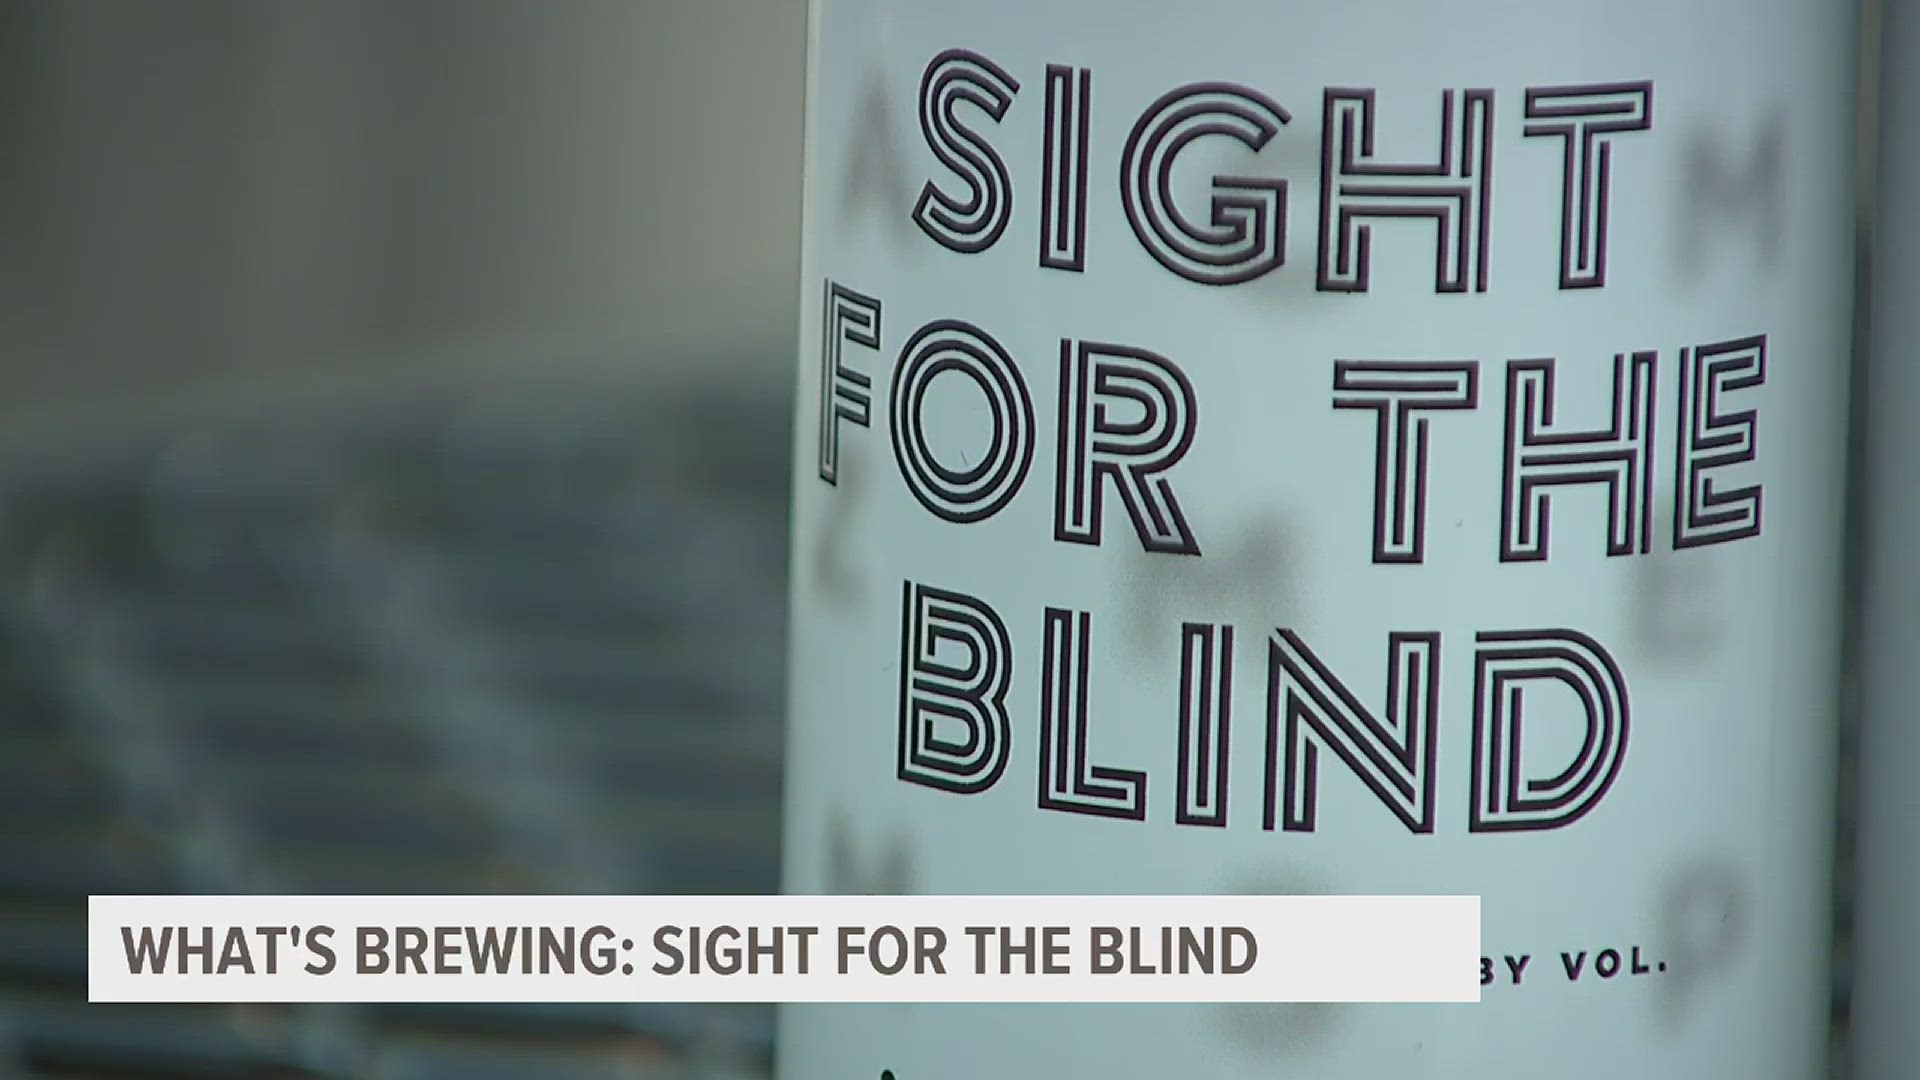 Sight for the Blind is the new beer Backpocket will be selling to raise money for the cause!